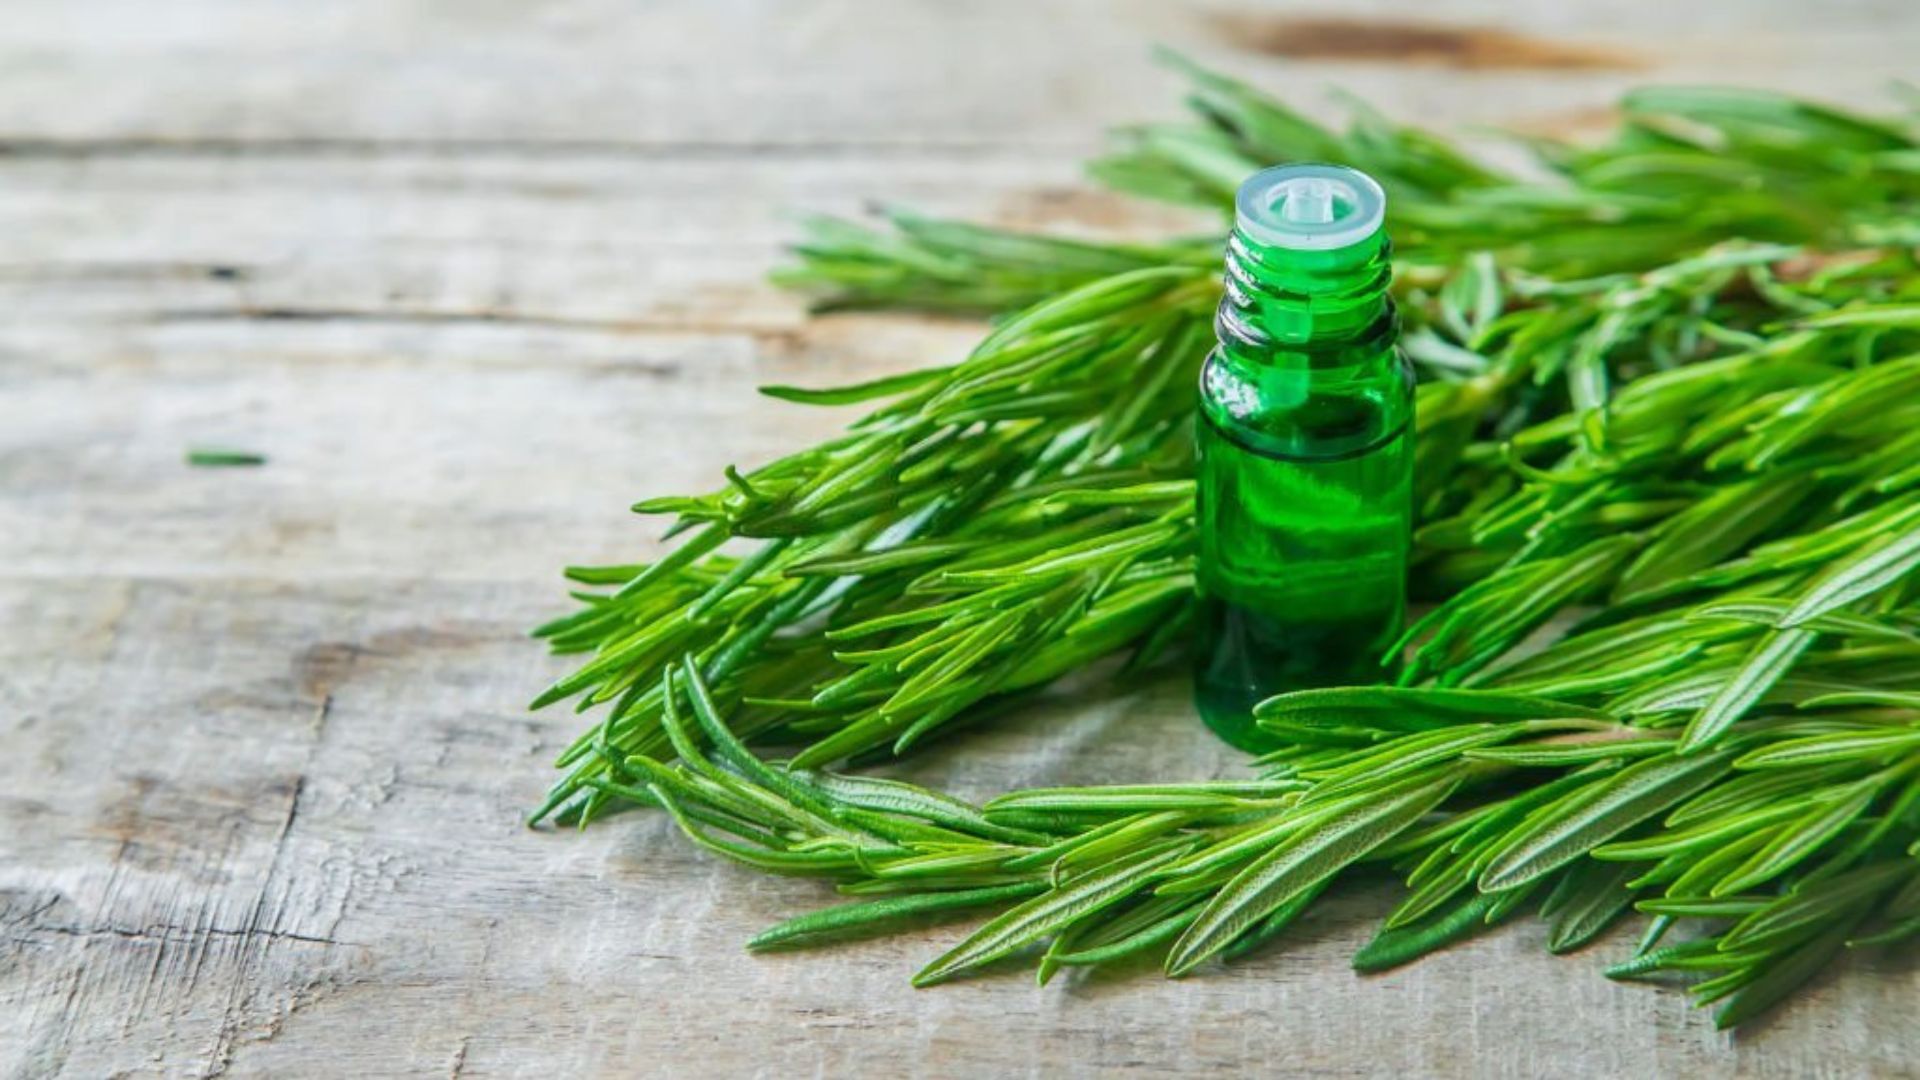 Rosemary Oil Benefits, History & Hair Growth Effect